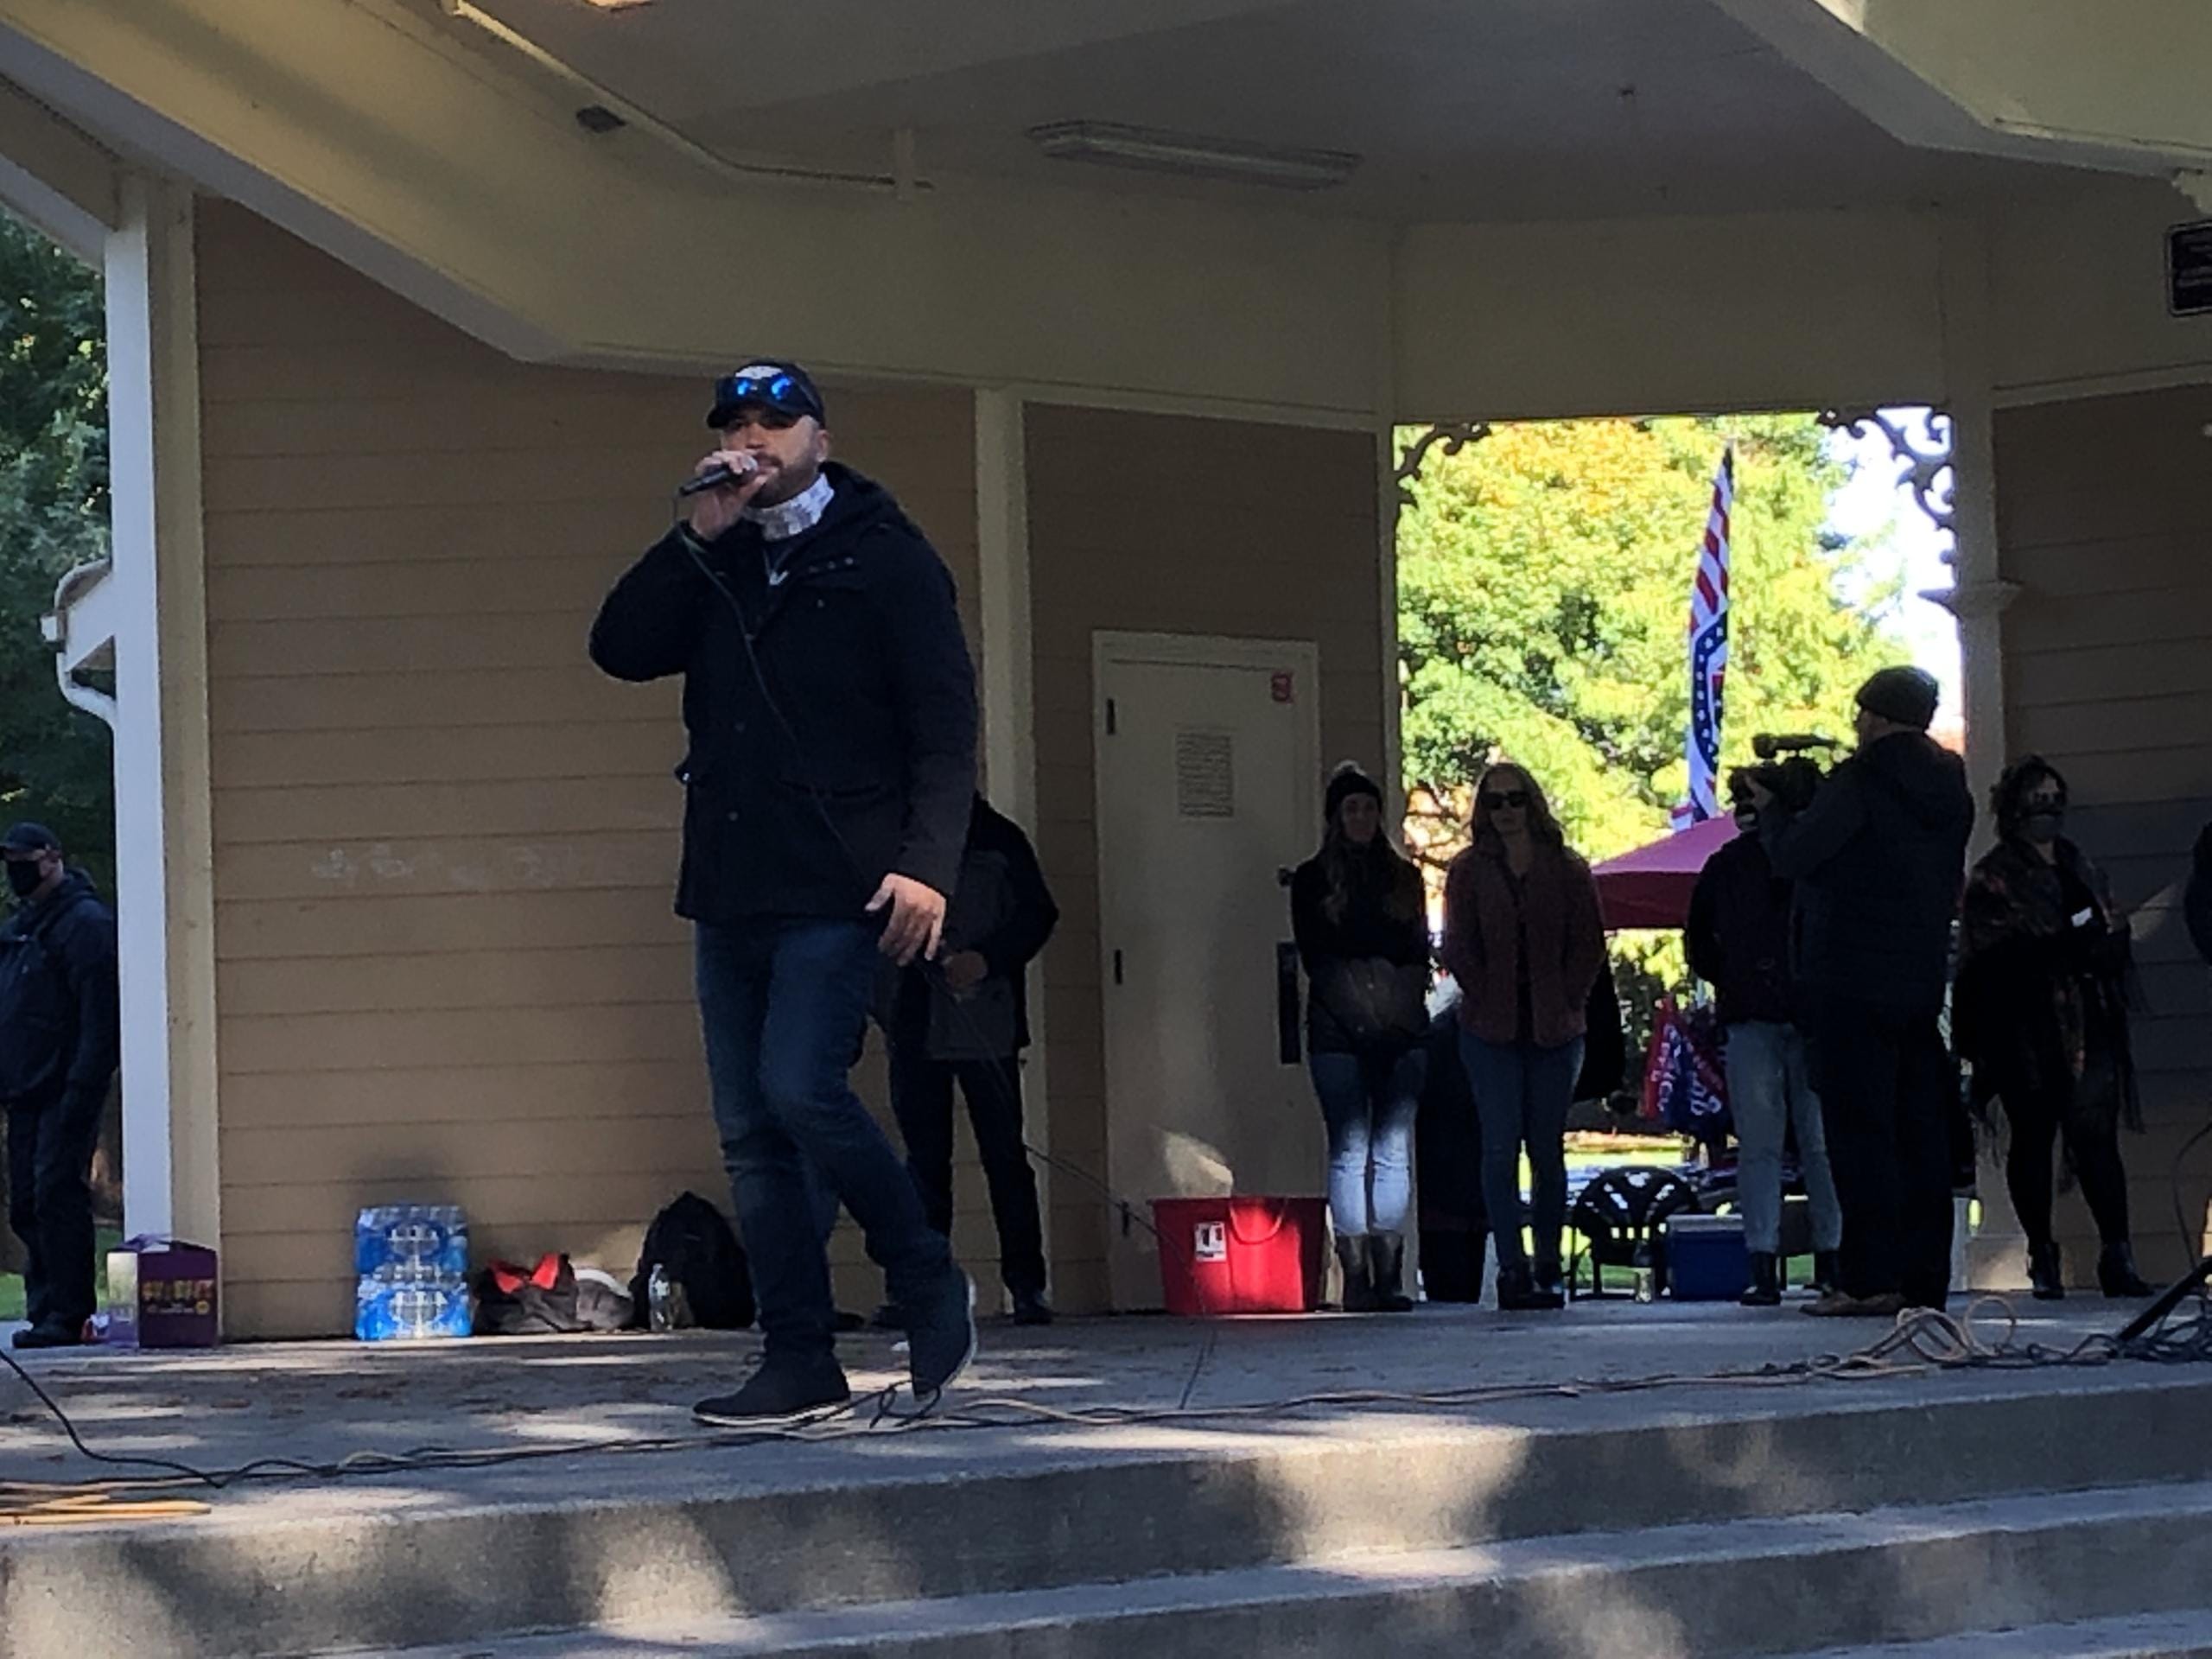 Patriot Prayer founder Joey Gibson speaks at a pro-free speech rally Sunday at Esther Short Park in Vancouver.